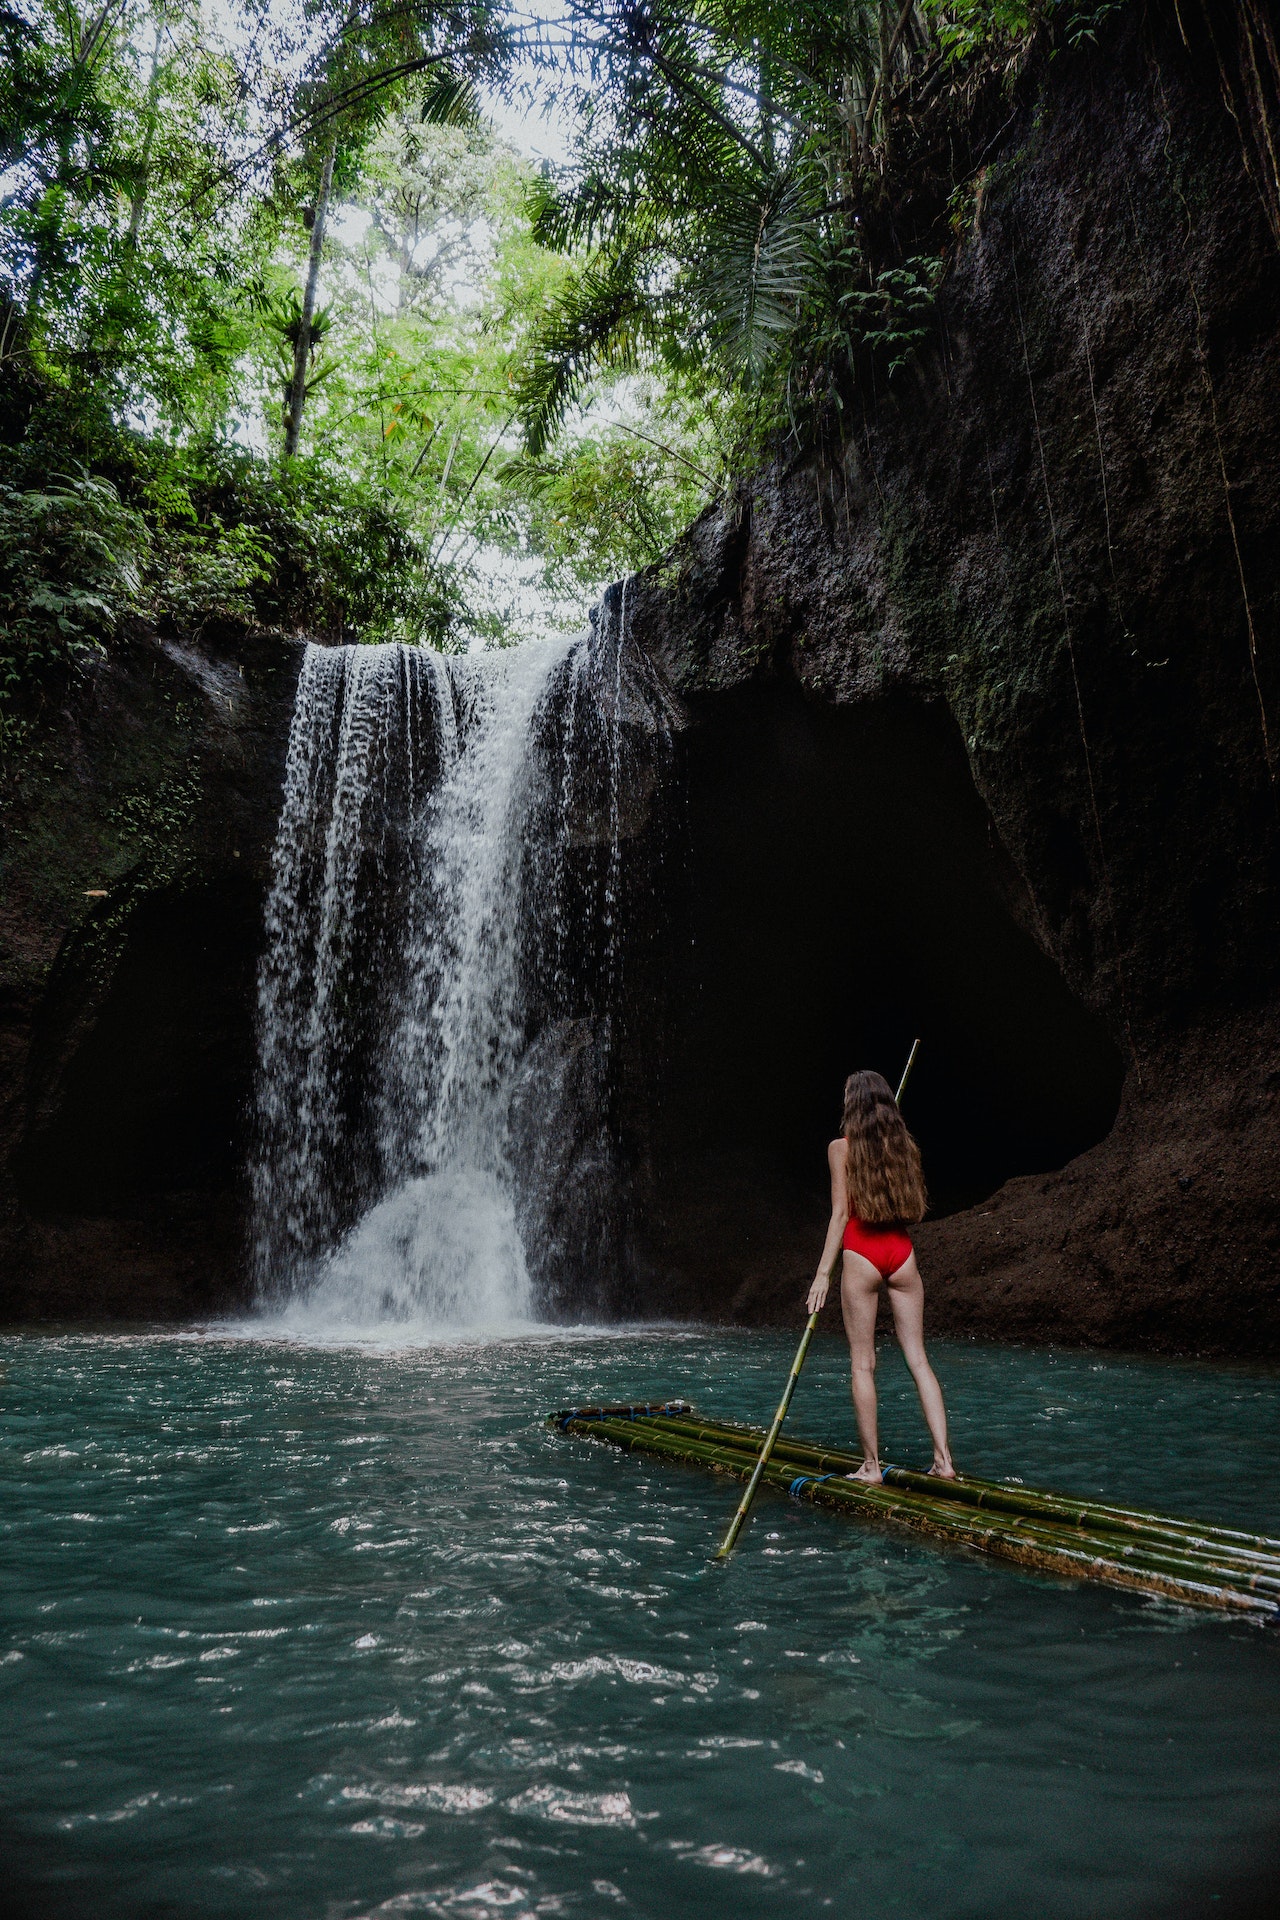 Woman on a raft in front of a stunning waterfall